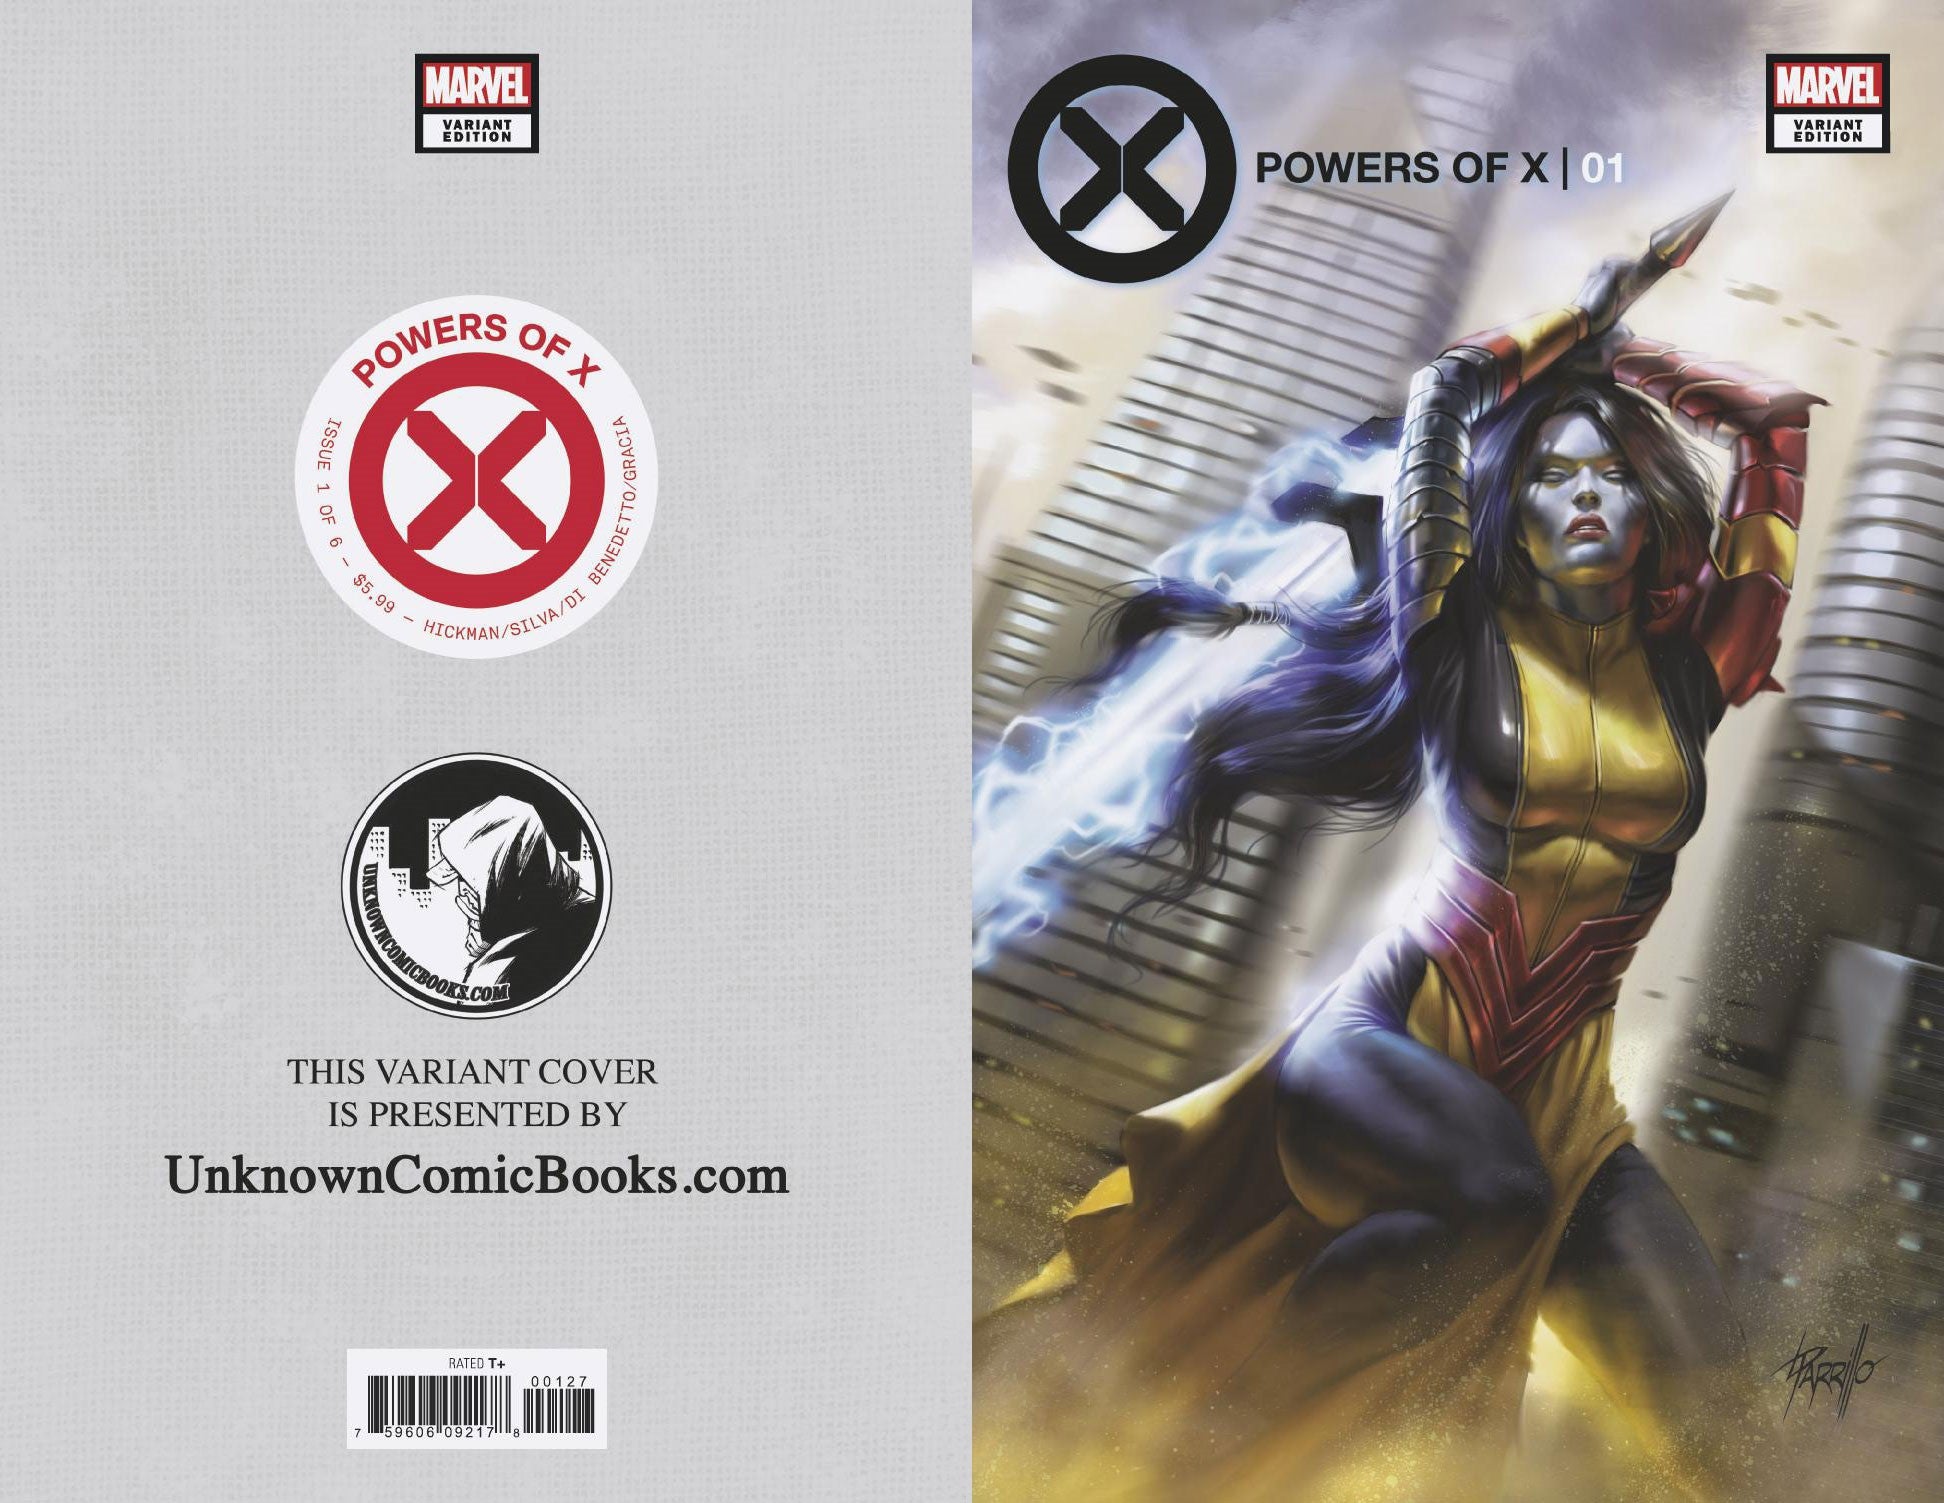 POWERS OF X #1 (OF 6) UNKNOWN COMICS LUCIO PARRILLO EXCLUSIVE (07/31/2019)